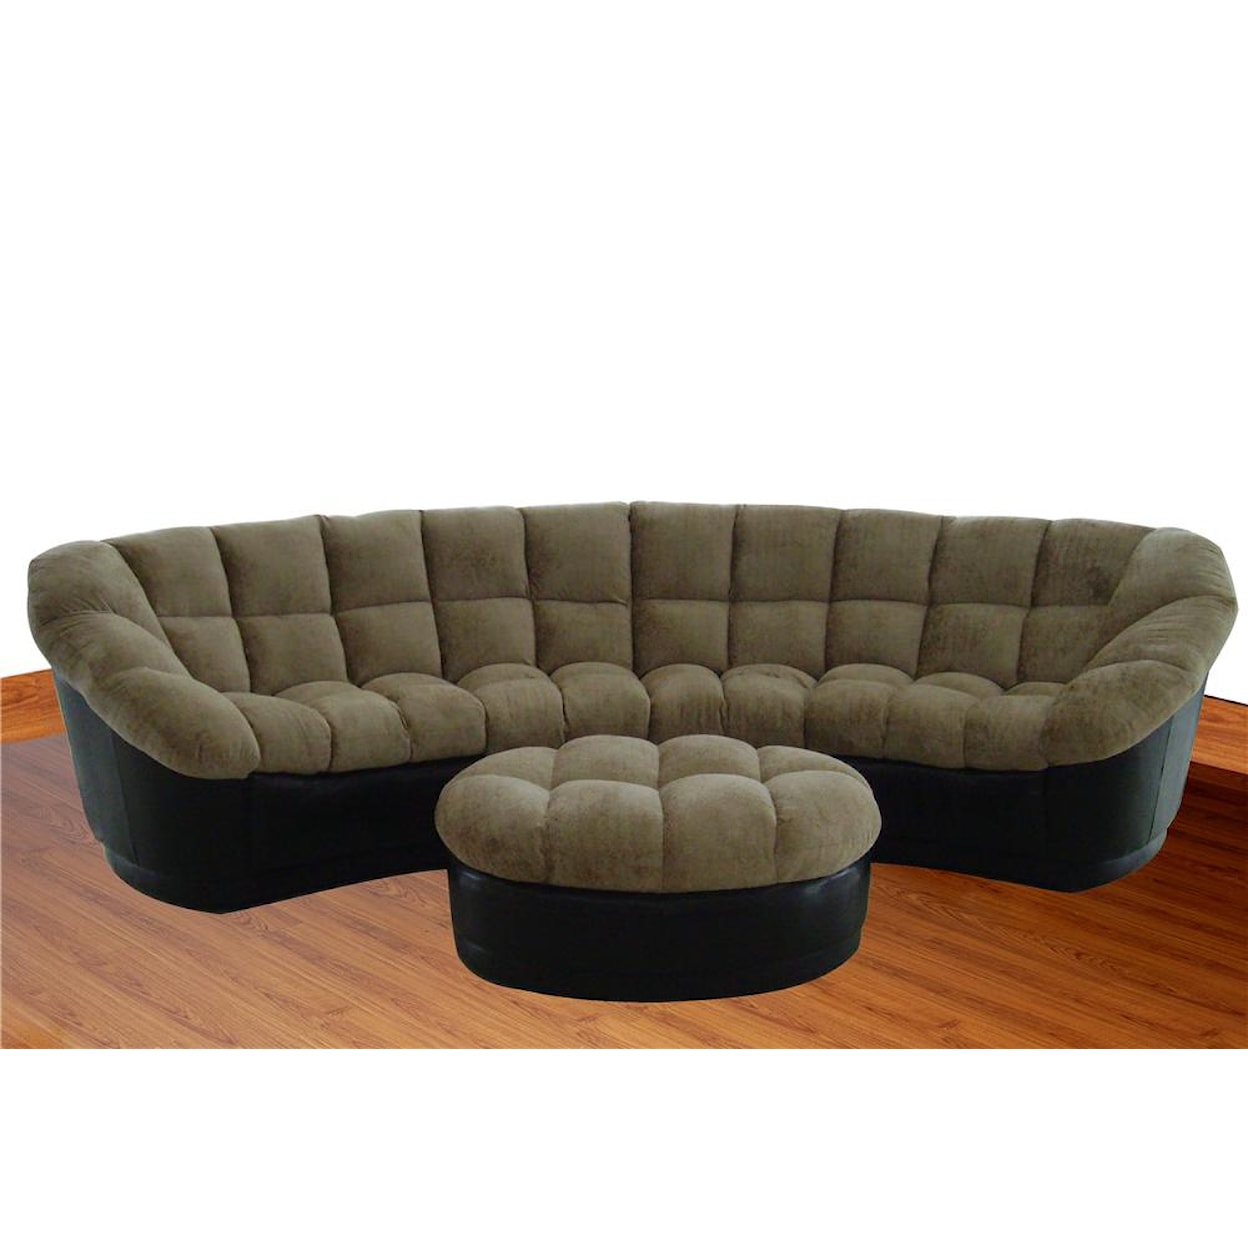 Primo International Ion 2 Piece Sectional